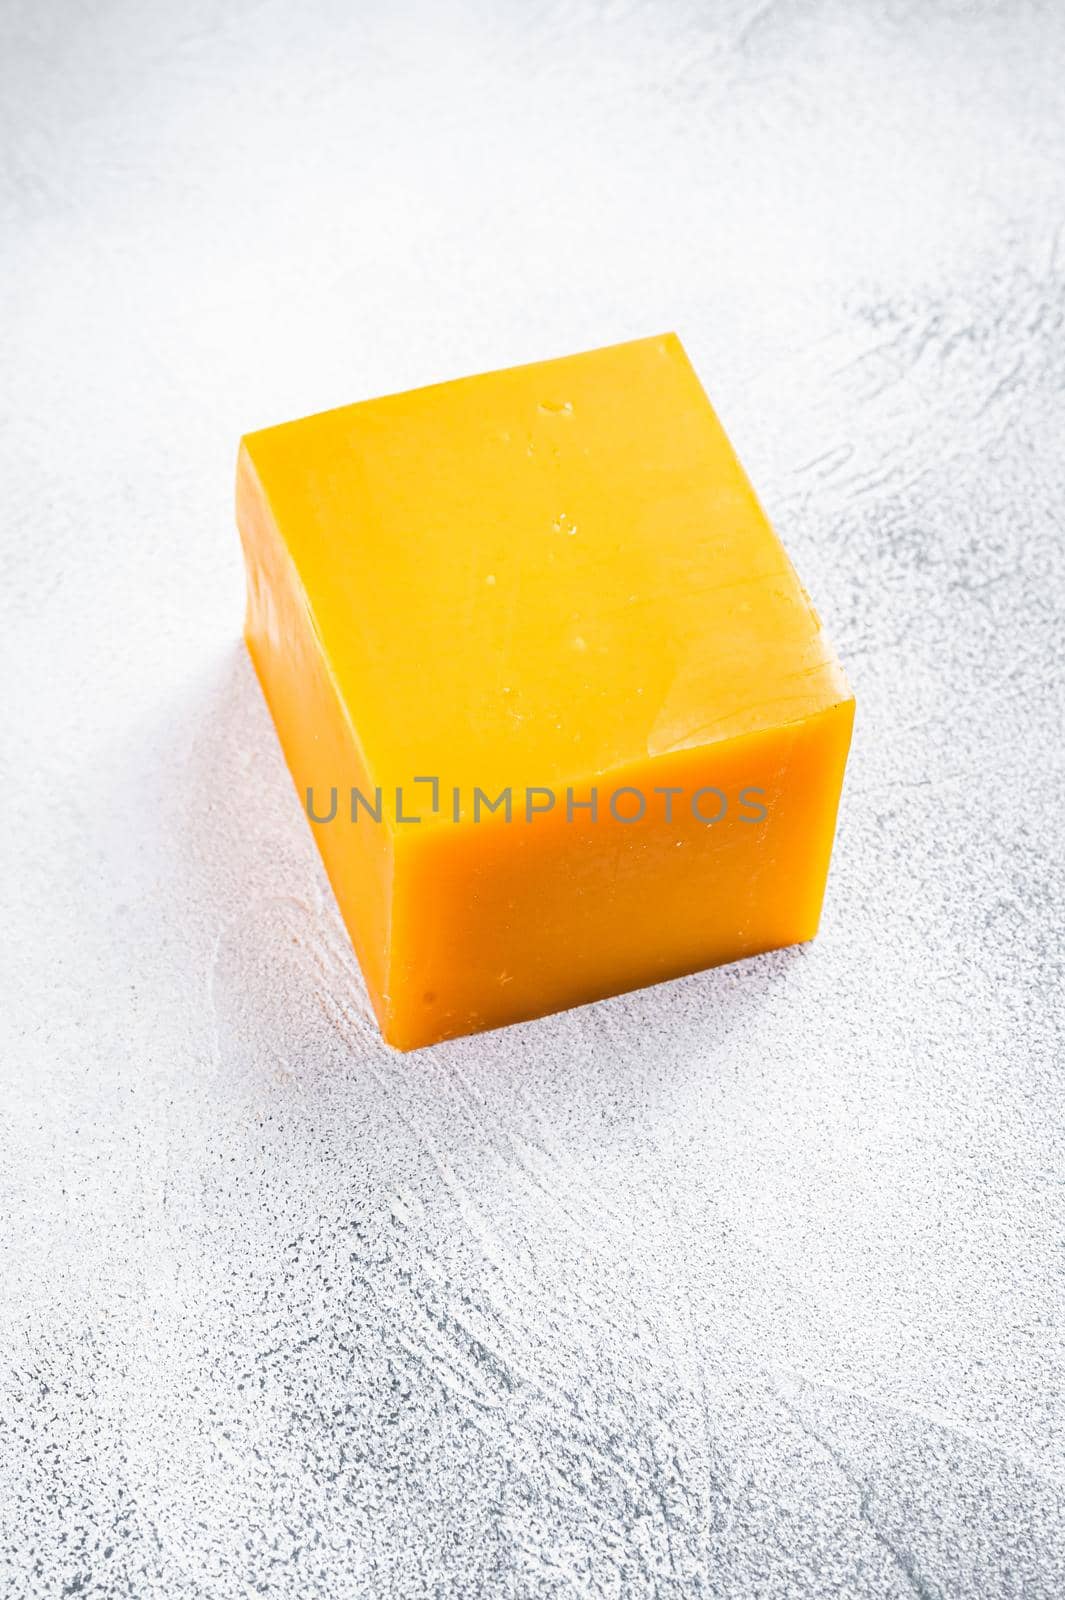 Cheddar Cheese block on a kitchen table. White background. Top view.